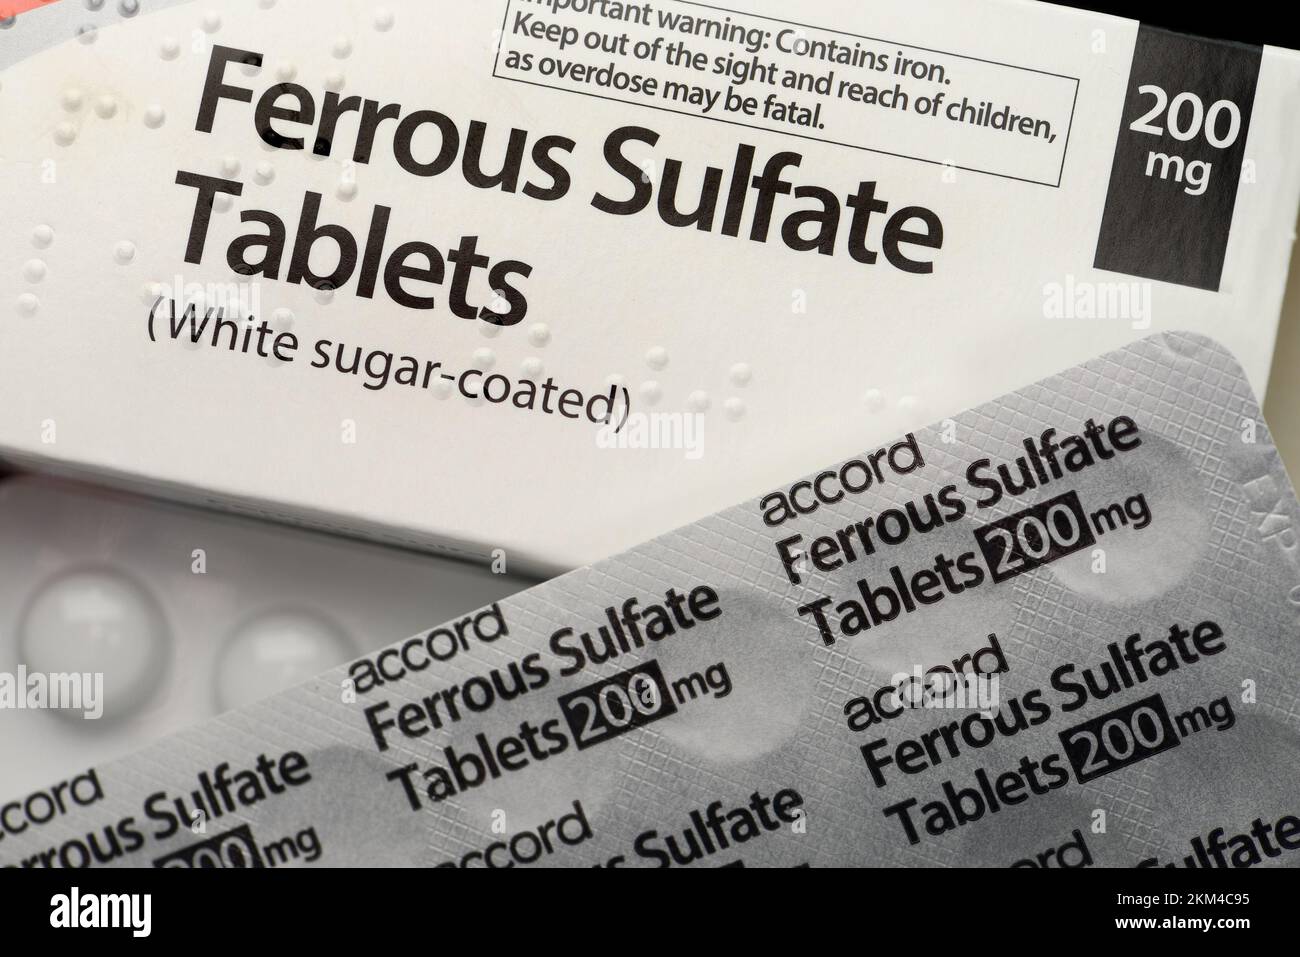 Ferrous Sulfate tablets - iron supplement to prevent low oxygen uptake by the red blood cells. 200mg Stock Photo